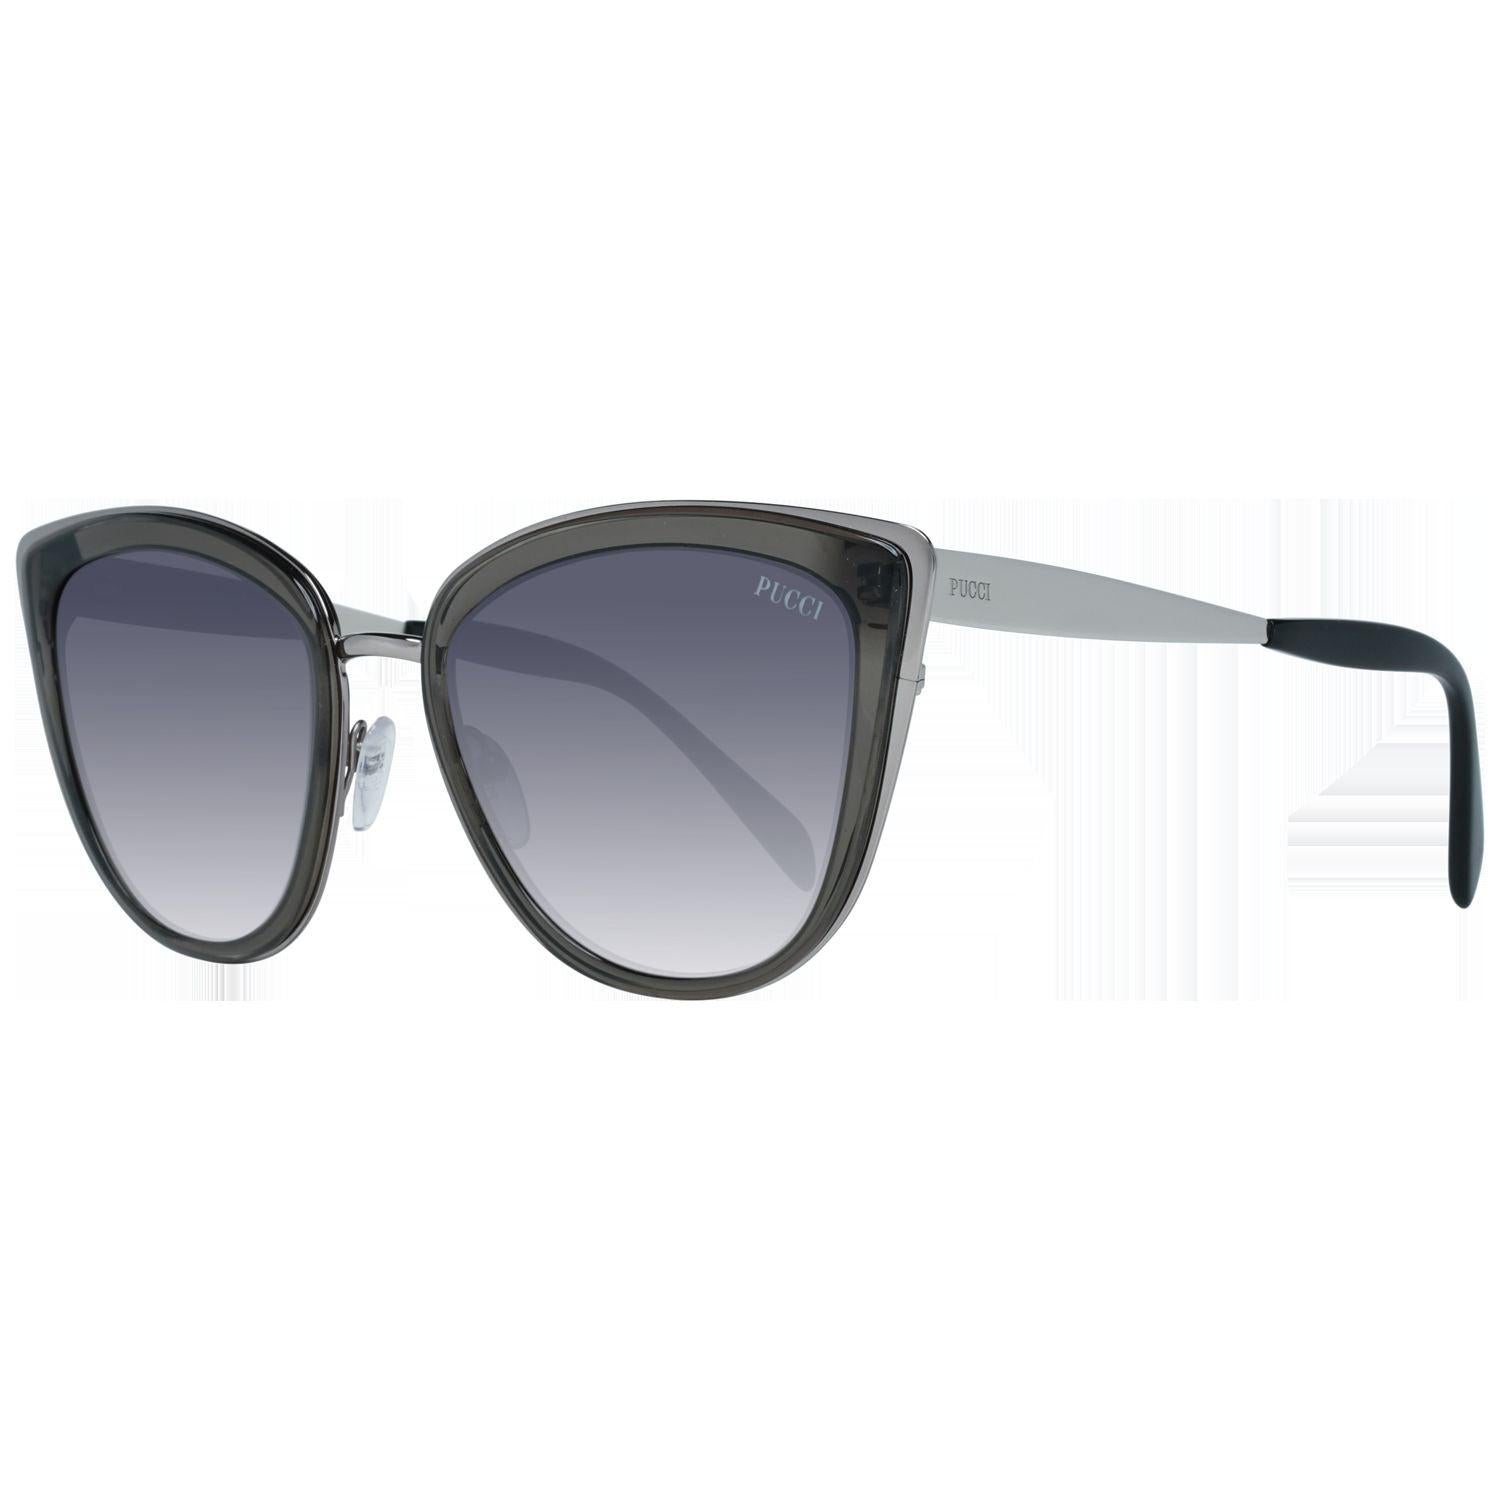 Emilio Pucci Mint Women Silver Sunglasses EP0092 20B. Made in Italy. Cat Eye design. Condition A+ - MINT NOS (NEW OLD STOCK) - They will come with a GENERIC case Details MATERIAL: Plastic COLOR: Grey MODEL: EP0092 GENDER: Women COUNTRY OF